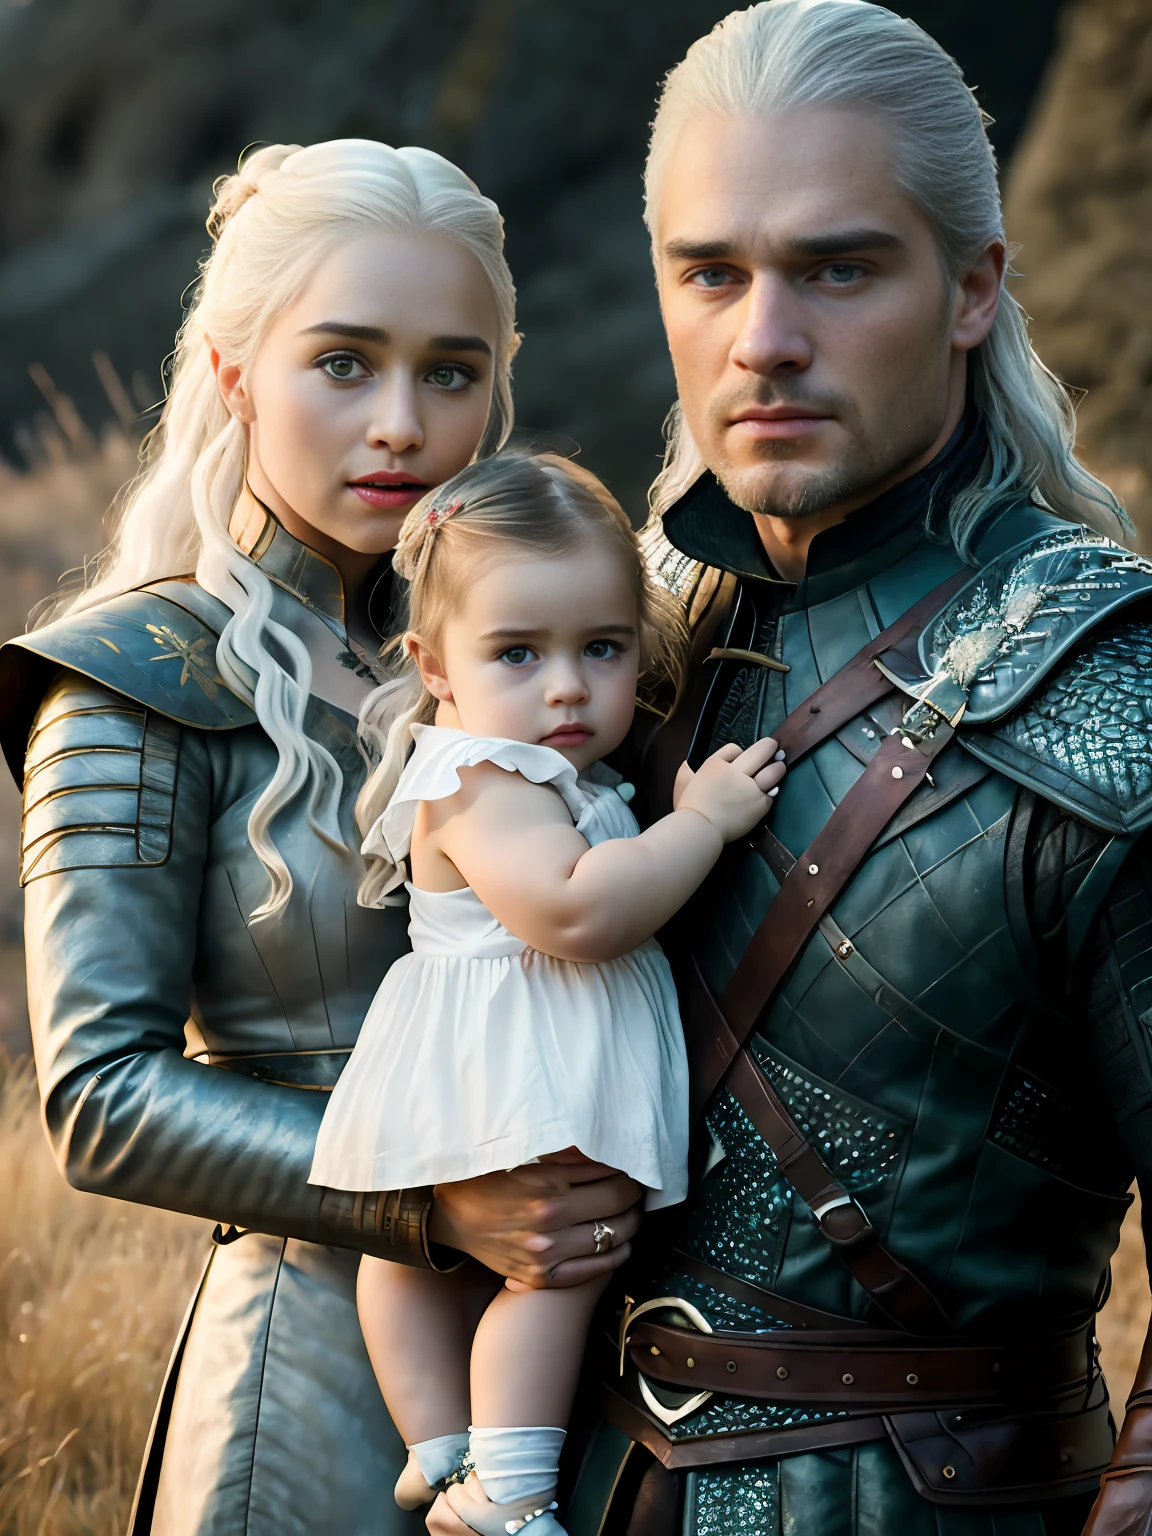 raw fullbody ((family photo of a father and mother with their daughter)), ((mother carrying daughter)), [1girl, daenerys targaryen, Emilia Clarke], (1man, Henry Cavill as Geralt de Rivia The Witcher), with their ((1girl, 5 year old daughter)))), medieval clothing,((half body shot)), realistic proportions, realistic pupils, ((3 member family portrait)) limited palette, highres, cinematic lighting, 8k resolution, front lit, sunrise, RAW photo, Nikon 85mm, Award Winning, Glamour Photograph, extremely detailed, beautiful Ukrainian, mind-bending, Noth-Yidik, raw fullbody photo of Daenerys Targaryen and Geralt de Rivia The Witcher with 5 year old daughter, highly detailed, artstation, smooth, sharp focus, 8K,, trending on instagram, trending on tumblr, hdr 4k, 8k